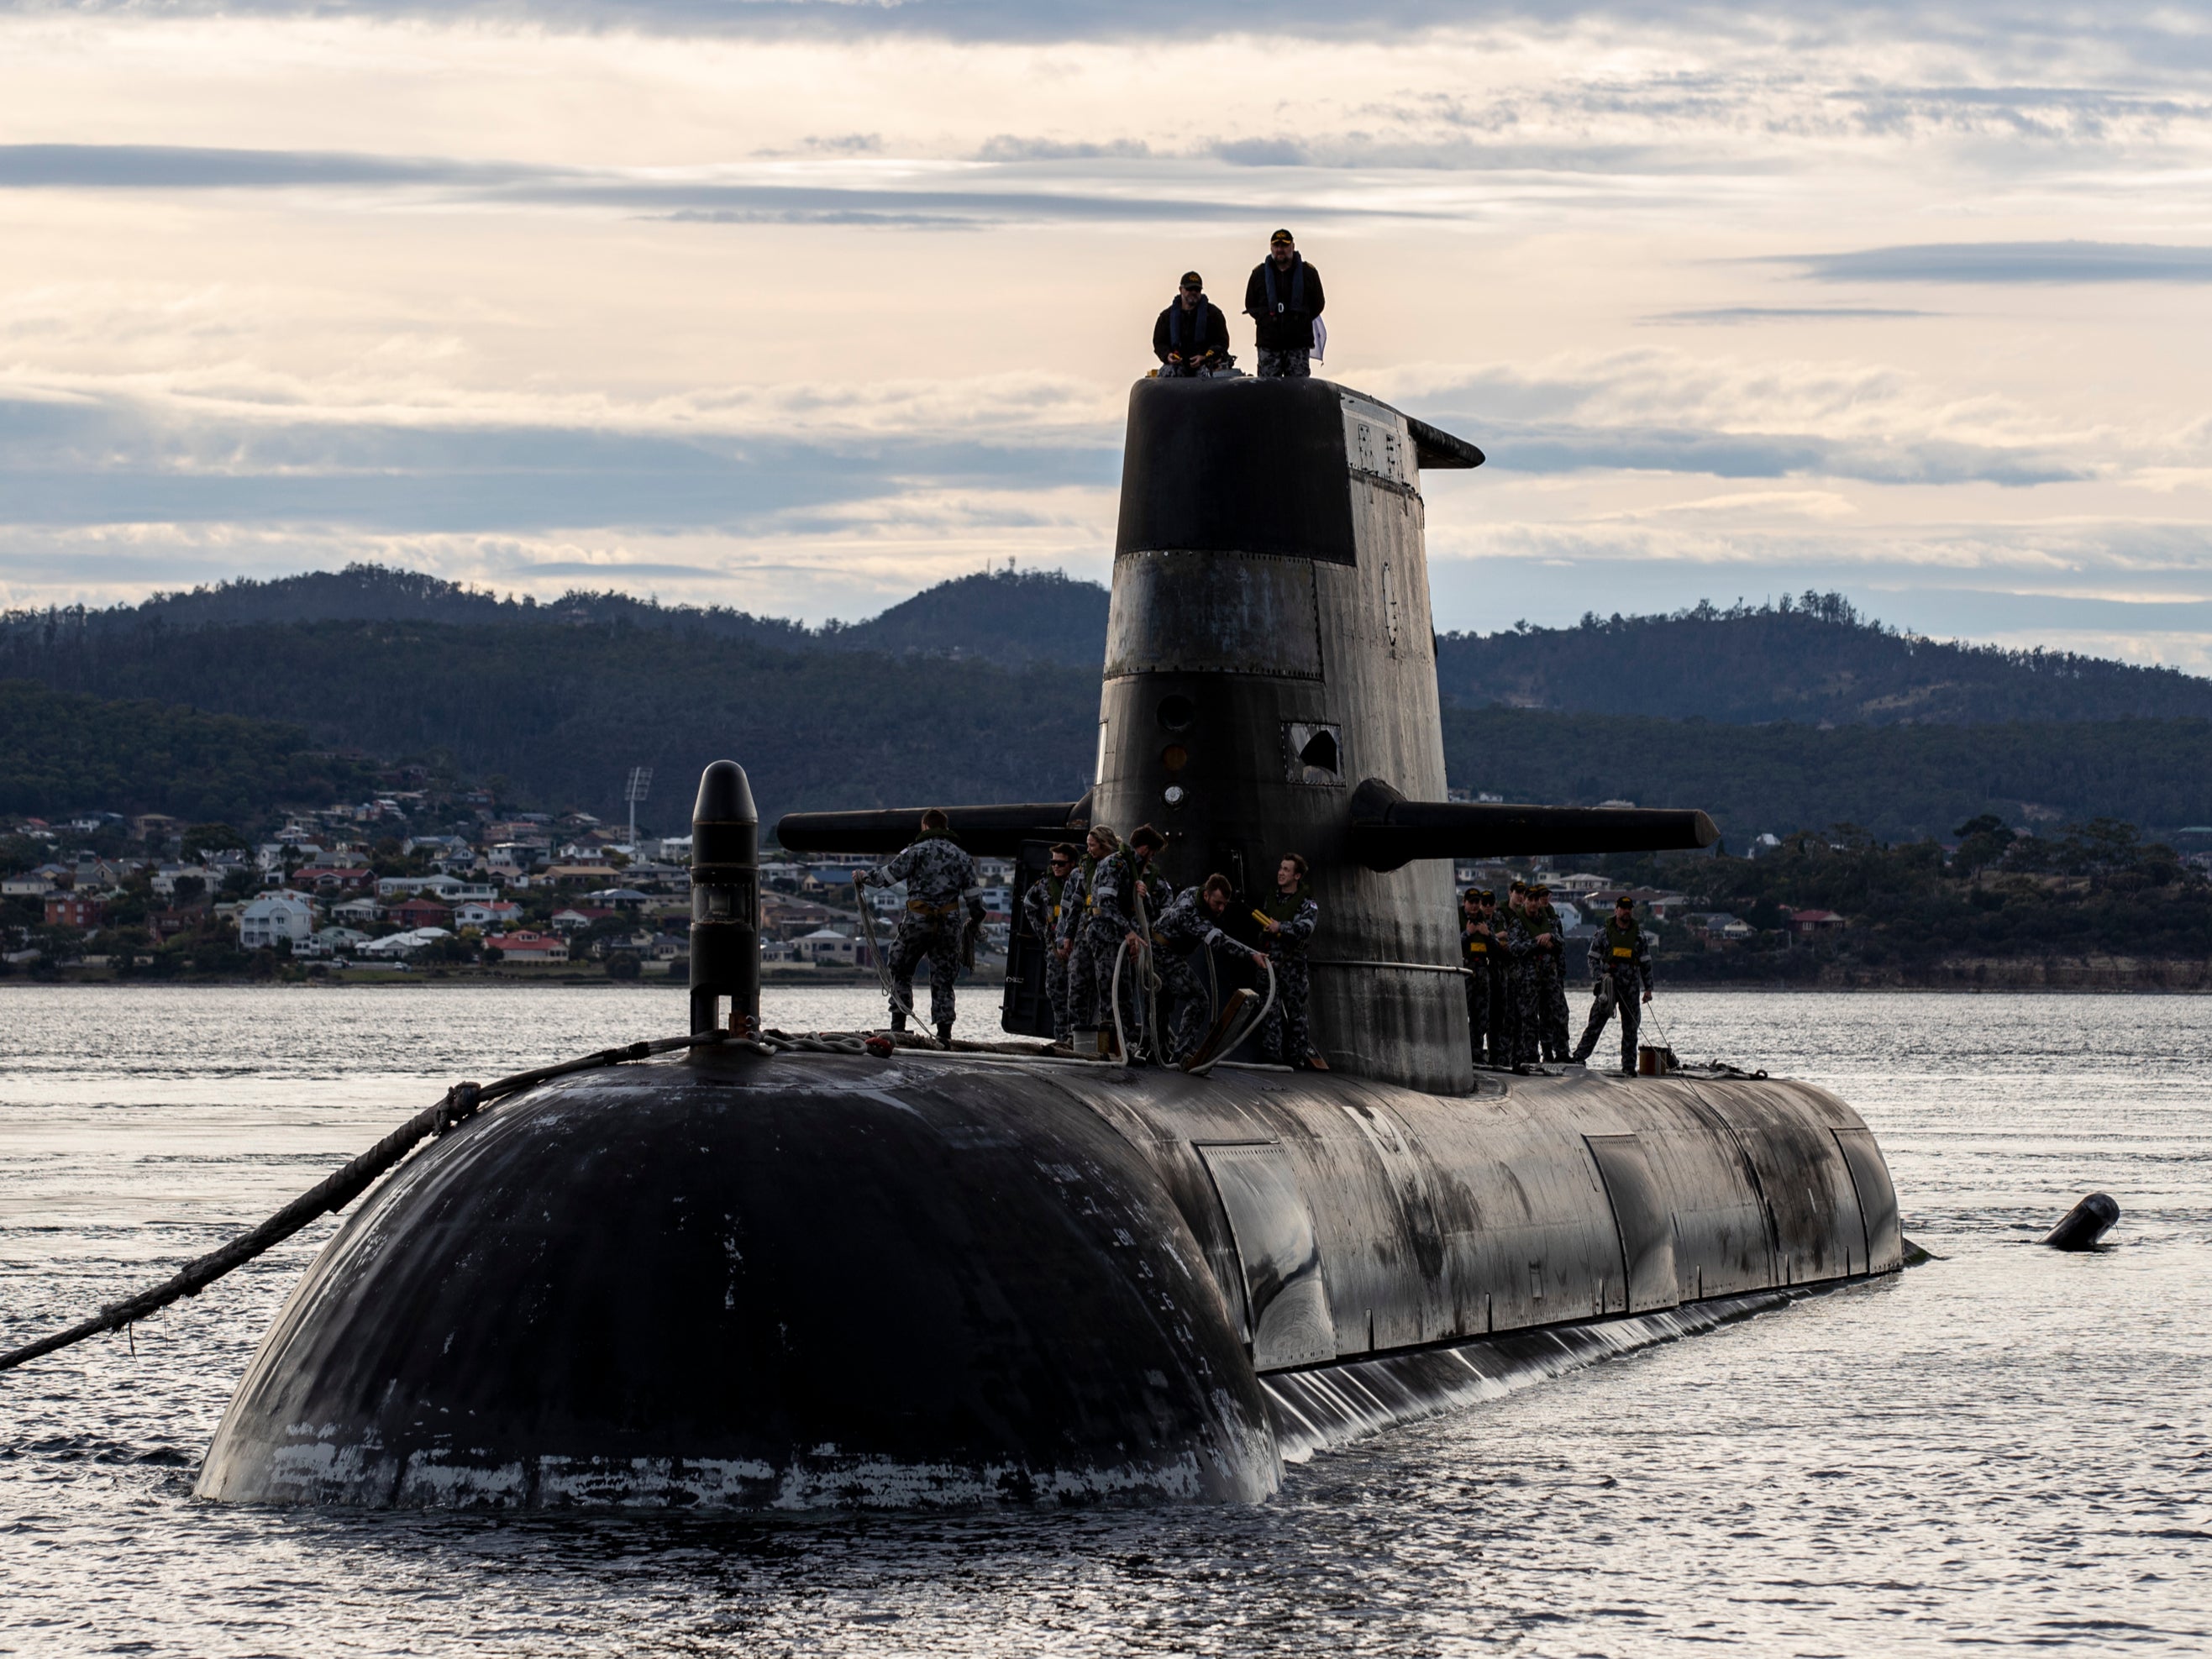 The alliance began with a deal to help replace Australia’s current submarine fleet, but will include a number of althoug areas